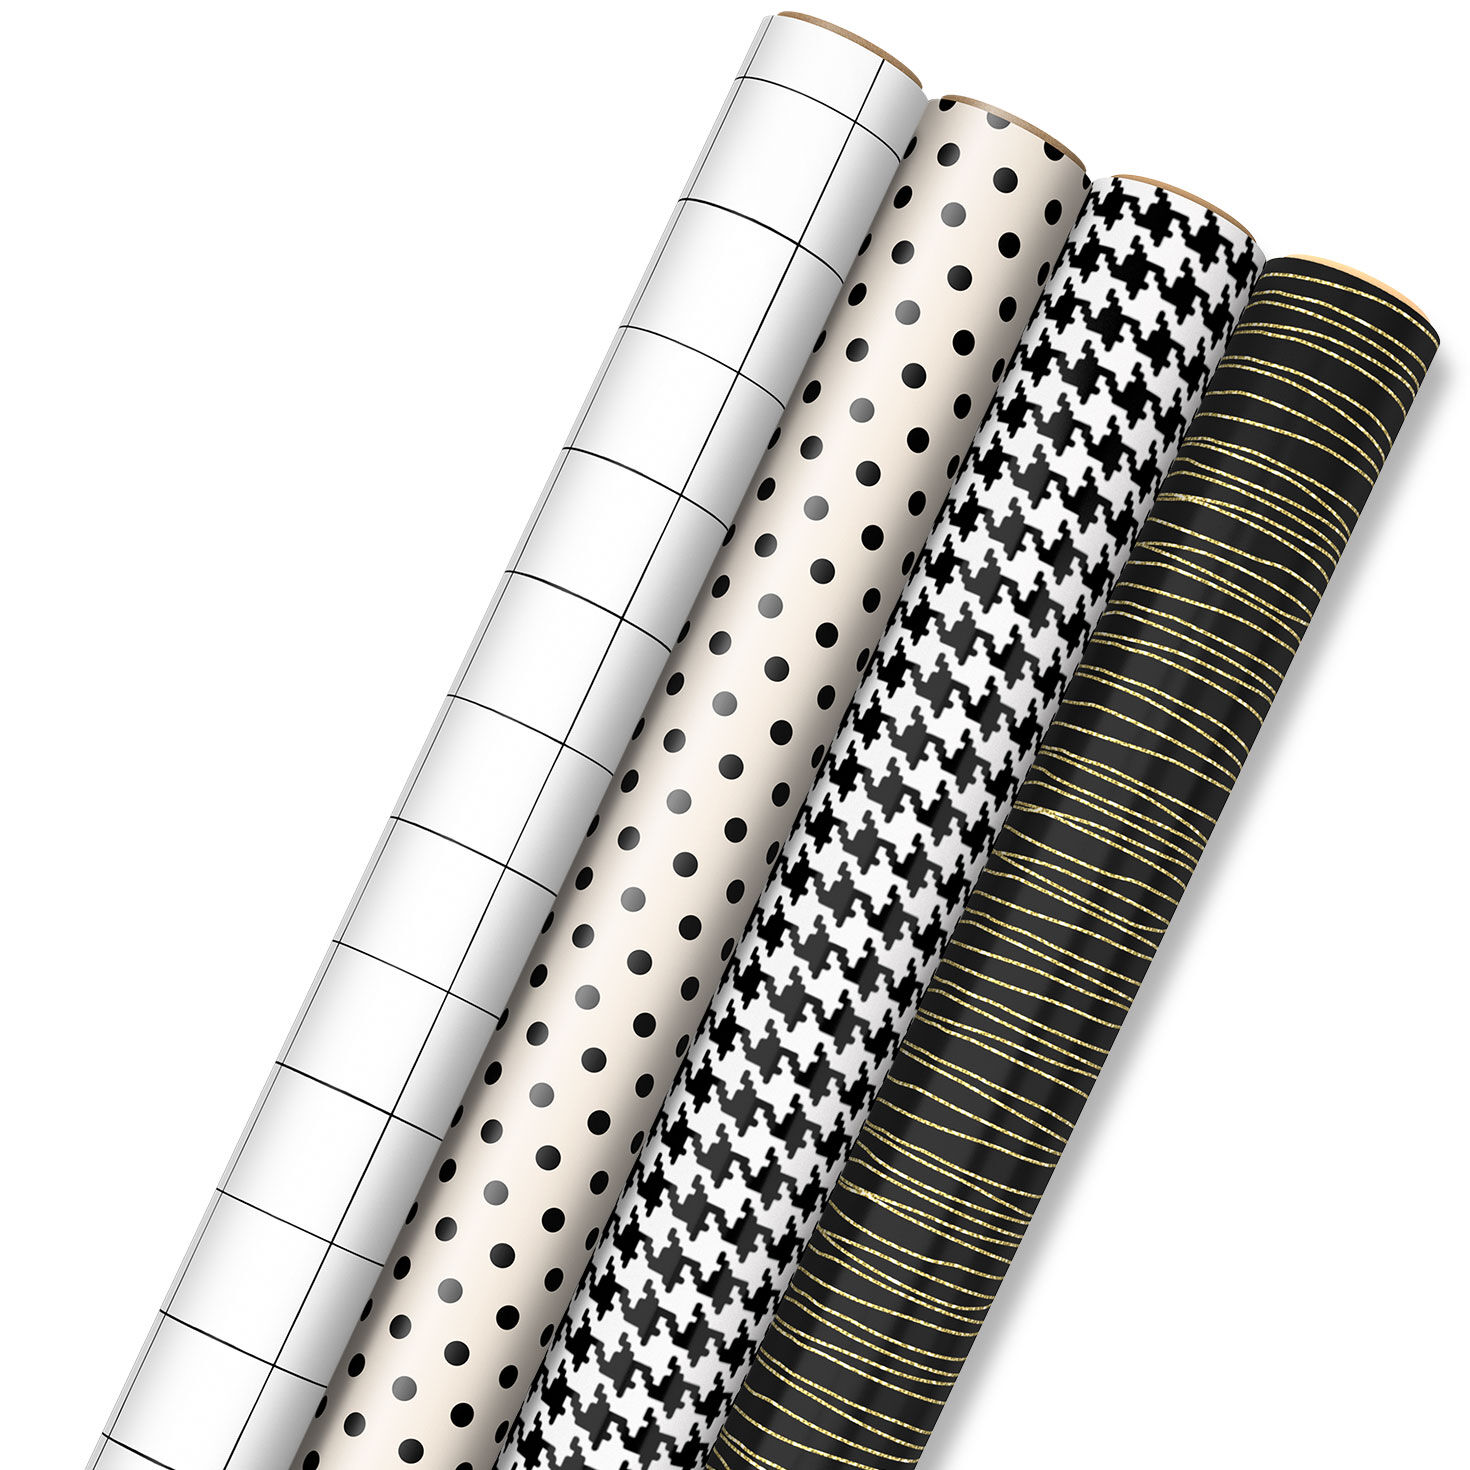 Sleek and Chic Monochrome Wrapping Paper Collection for only USD 4.99 | Hallmark